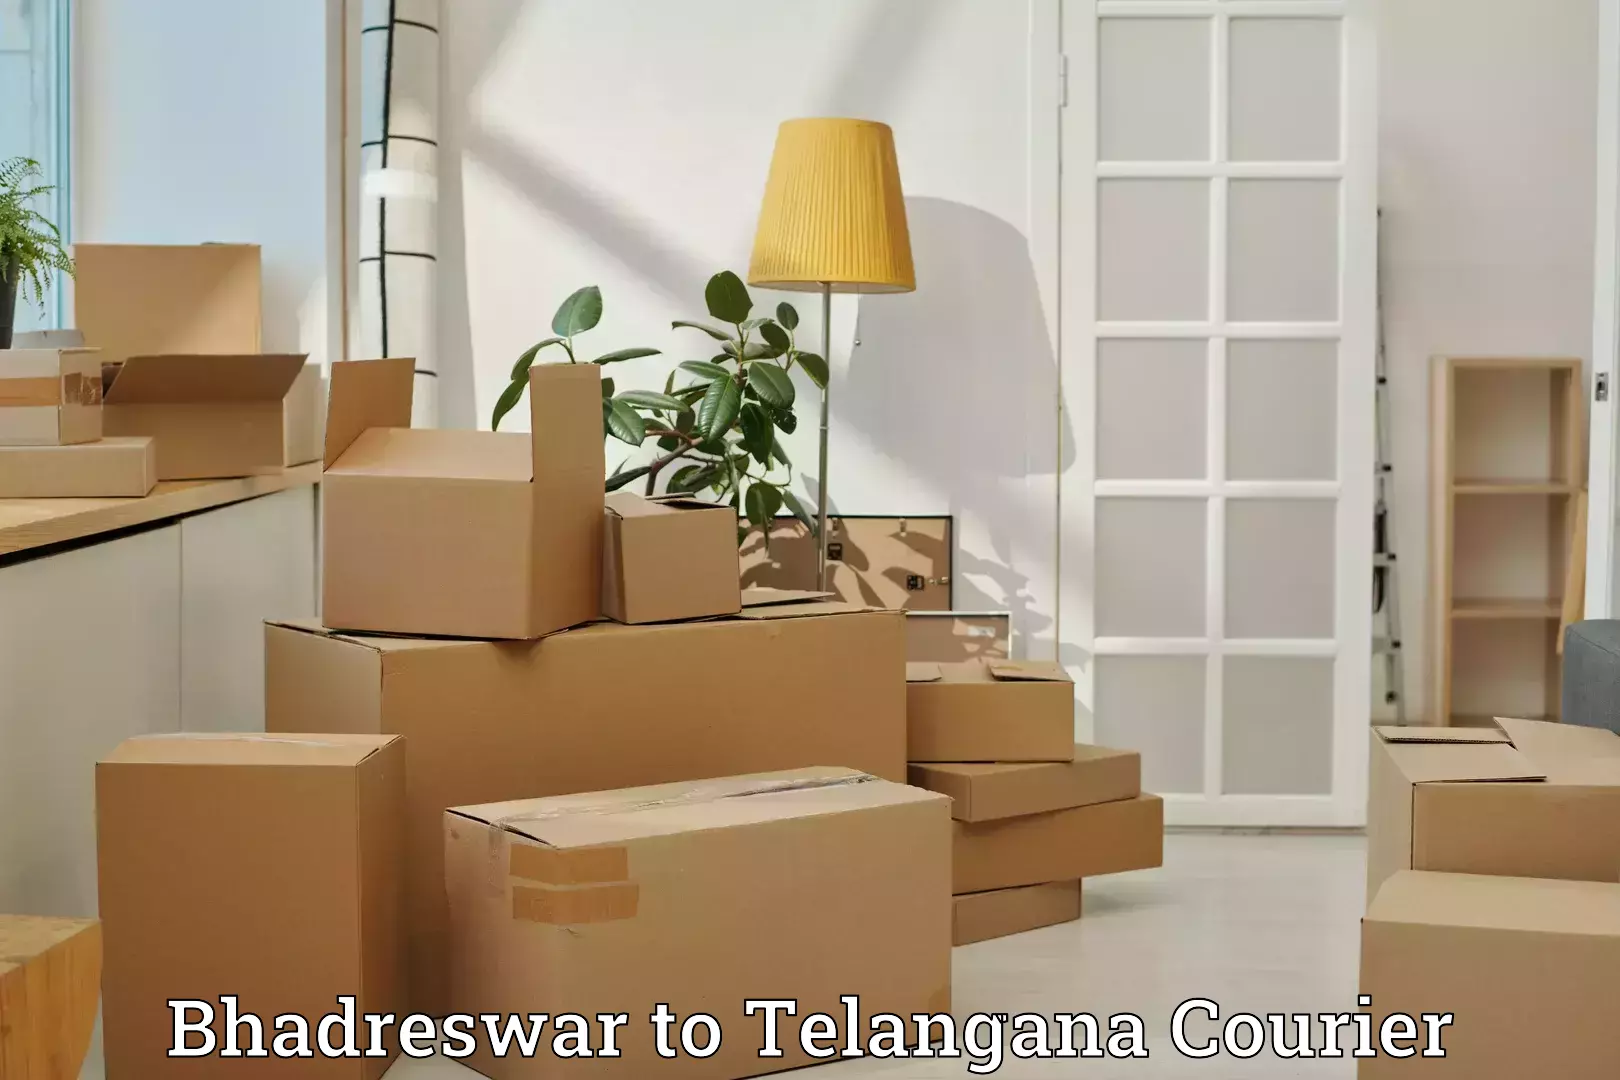 Emergency baggage service in Bhadreswar to Khairatabad